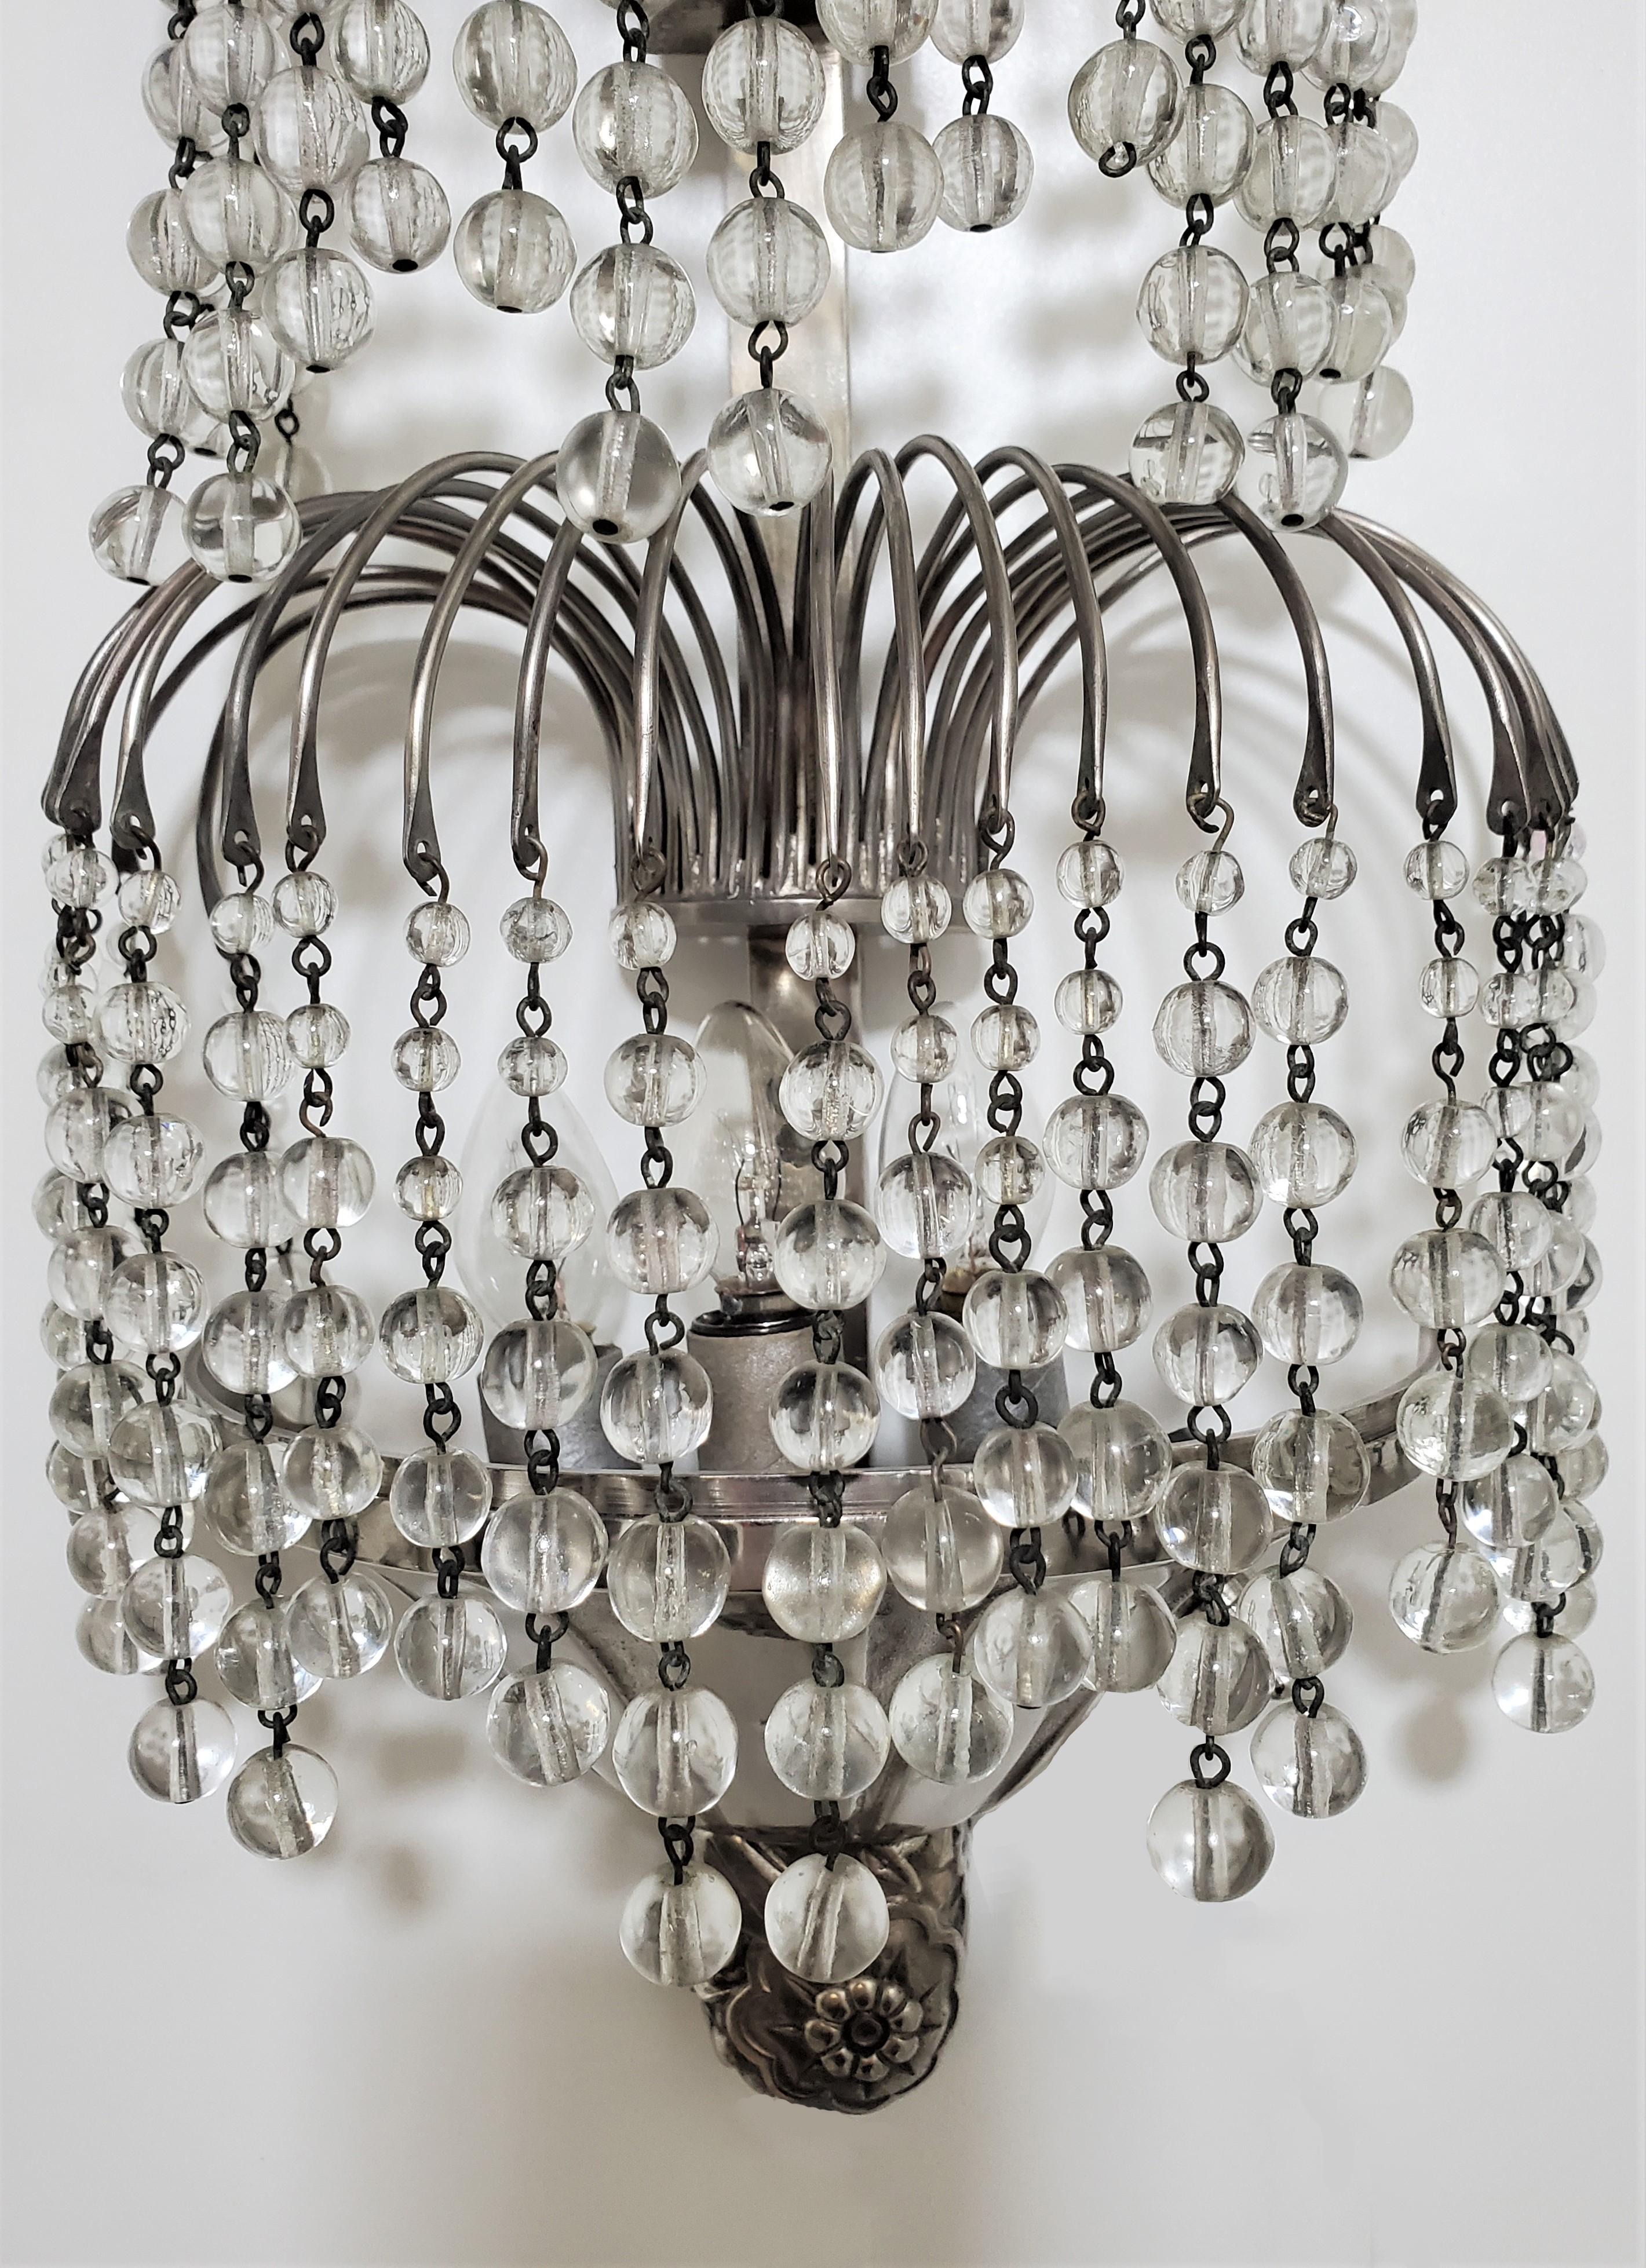 Pair of Tiered Crystal French Art Deco Wall Sconces Attrib to Sue et Mare For Sale 5